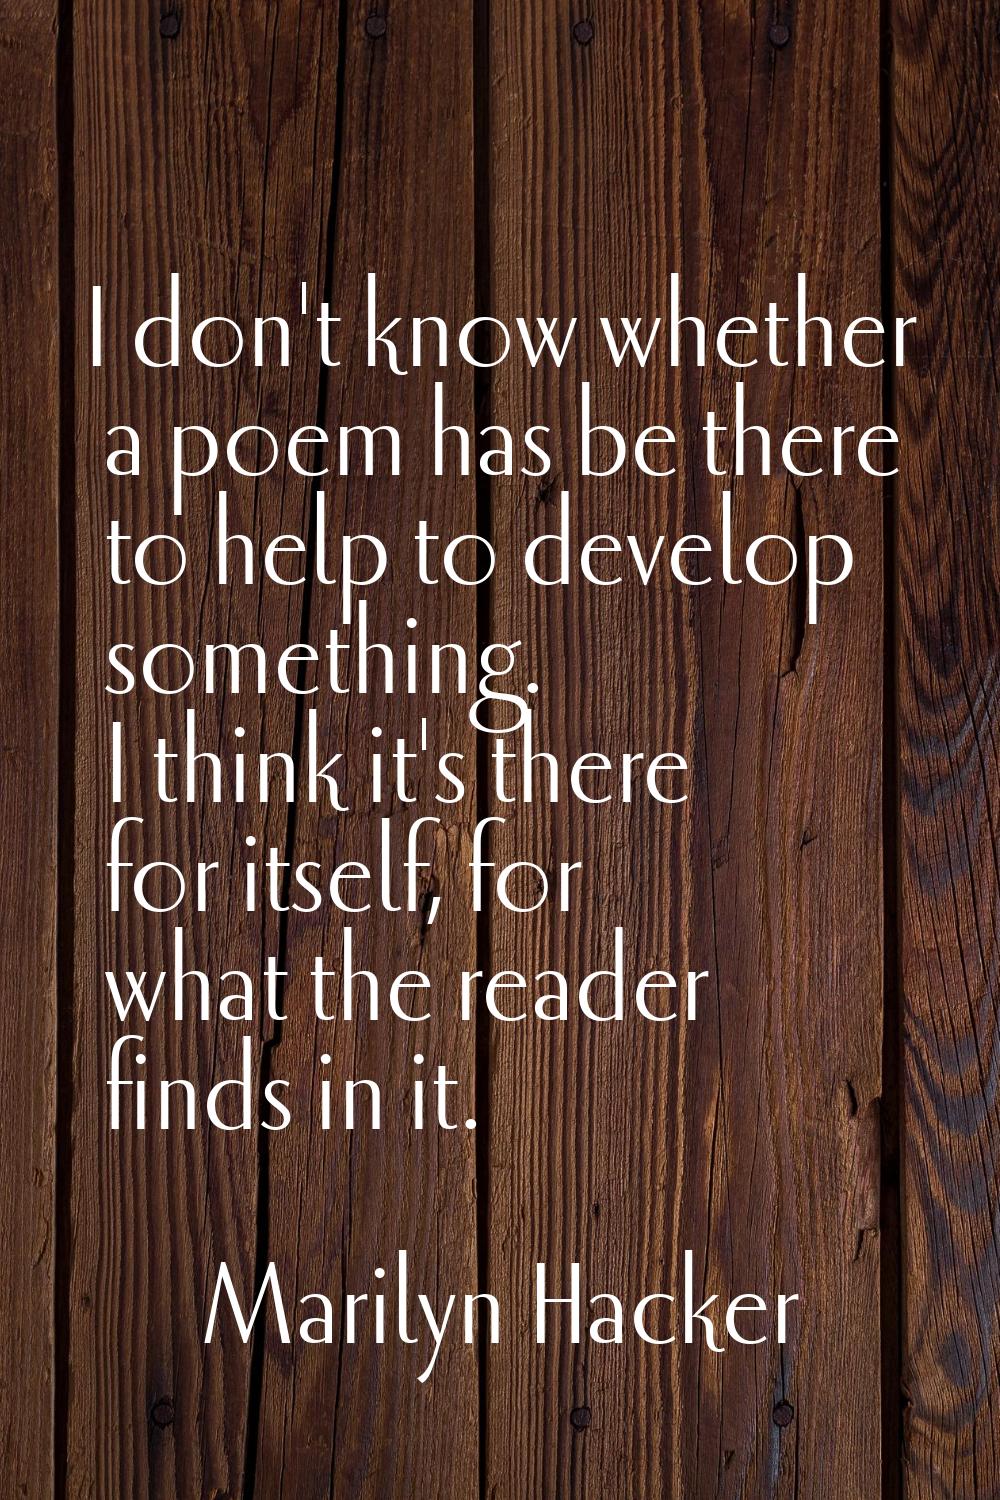 I don't know whether a poem has be there to help to develop something. I think it's there for itsel